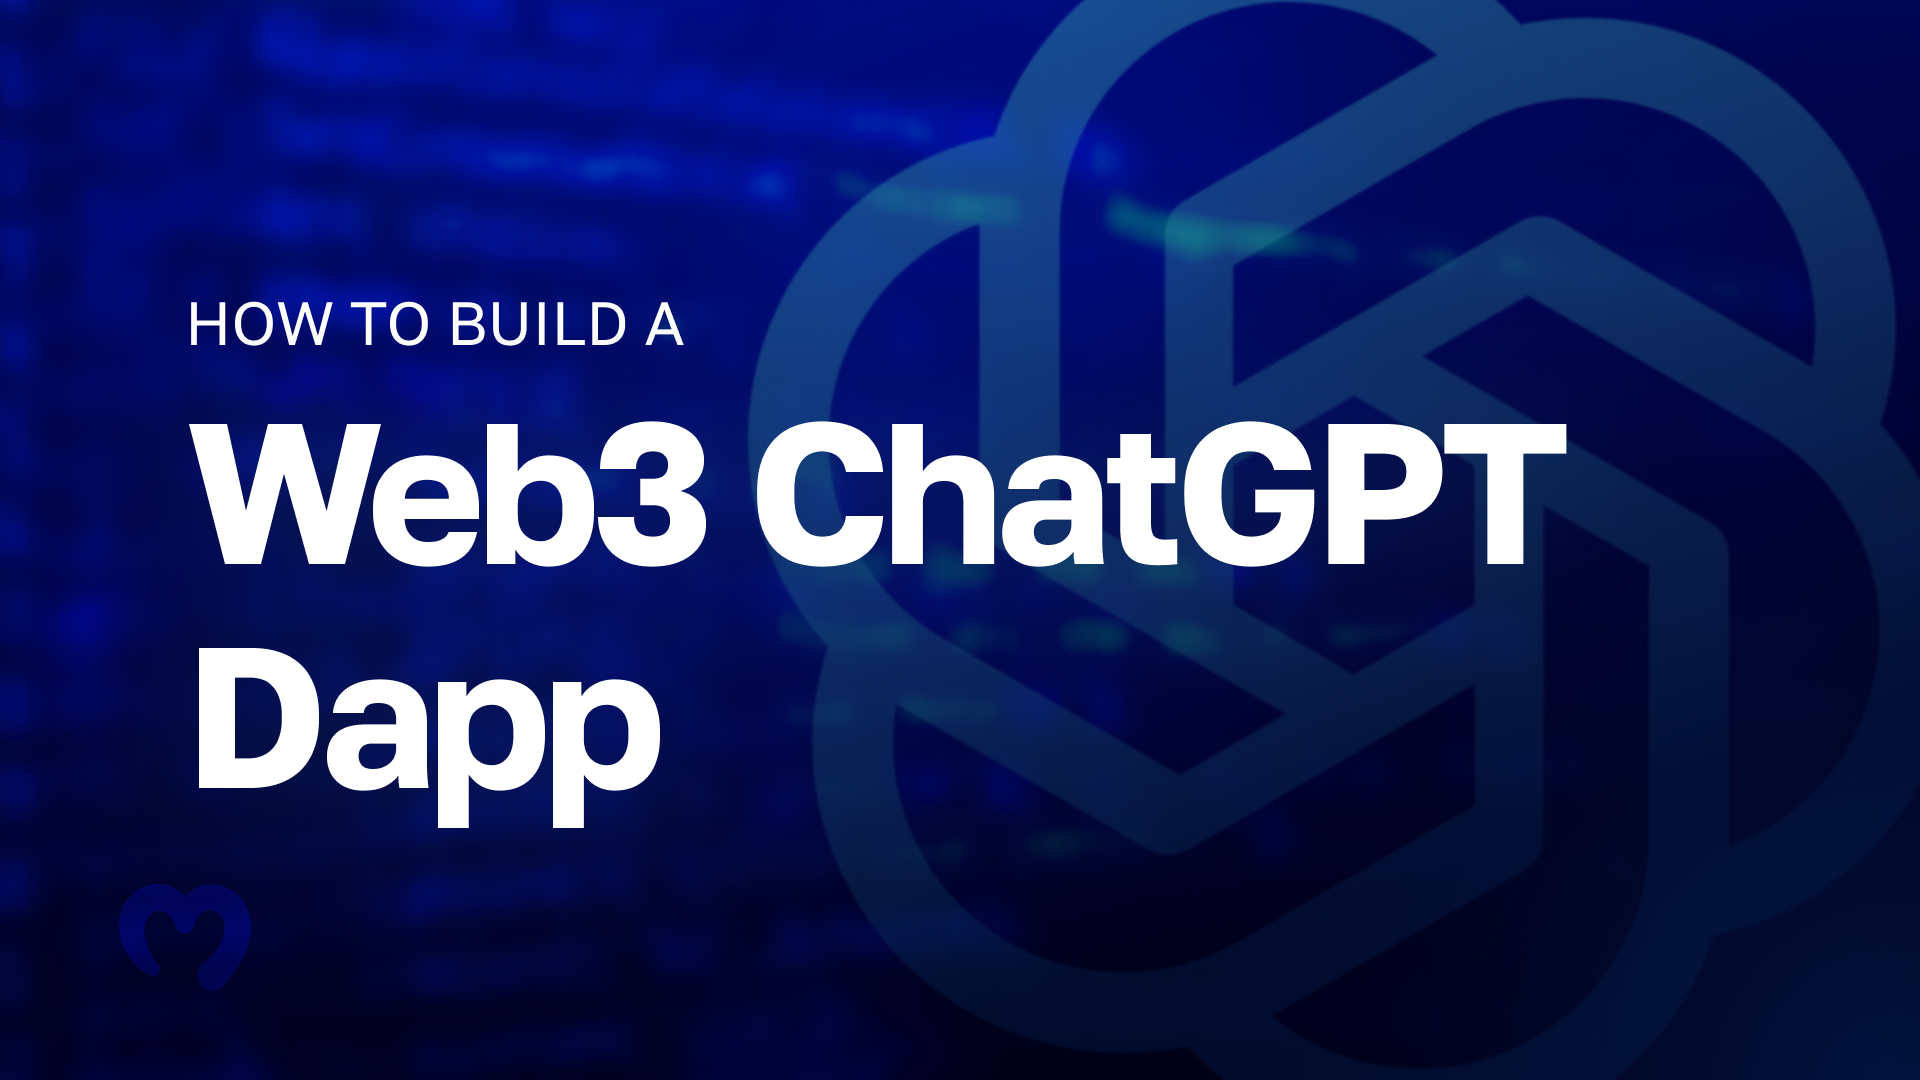 How to Build a Web3 ChatGPT Dapp